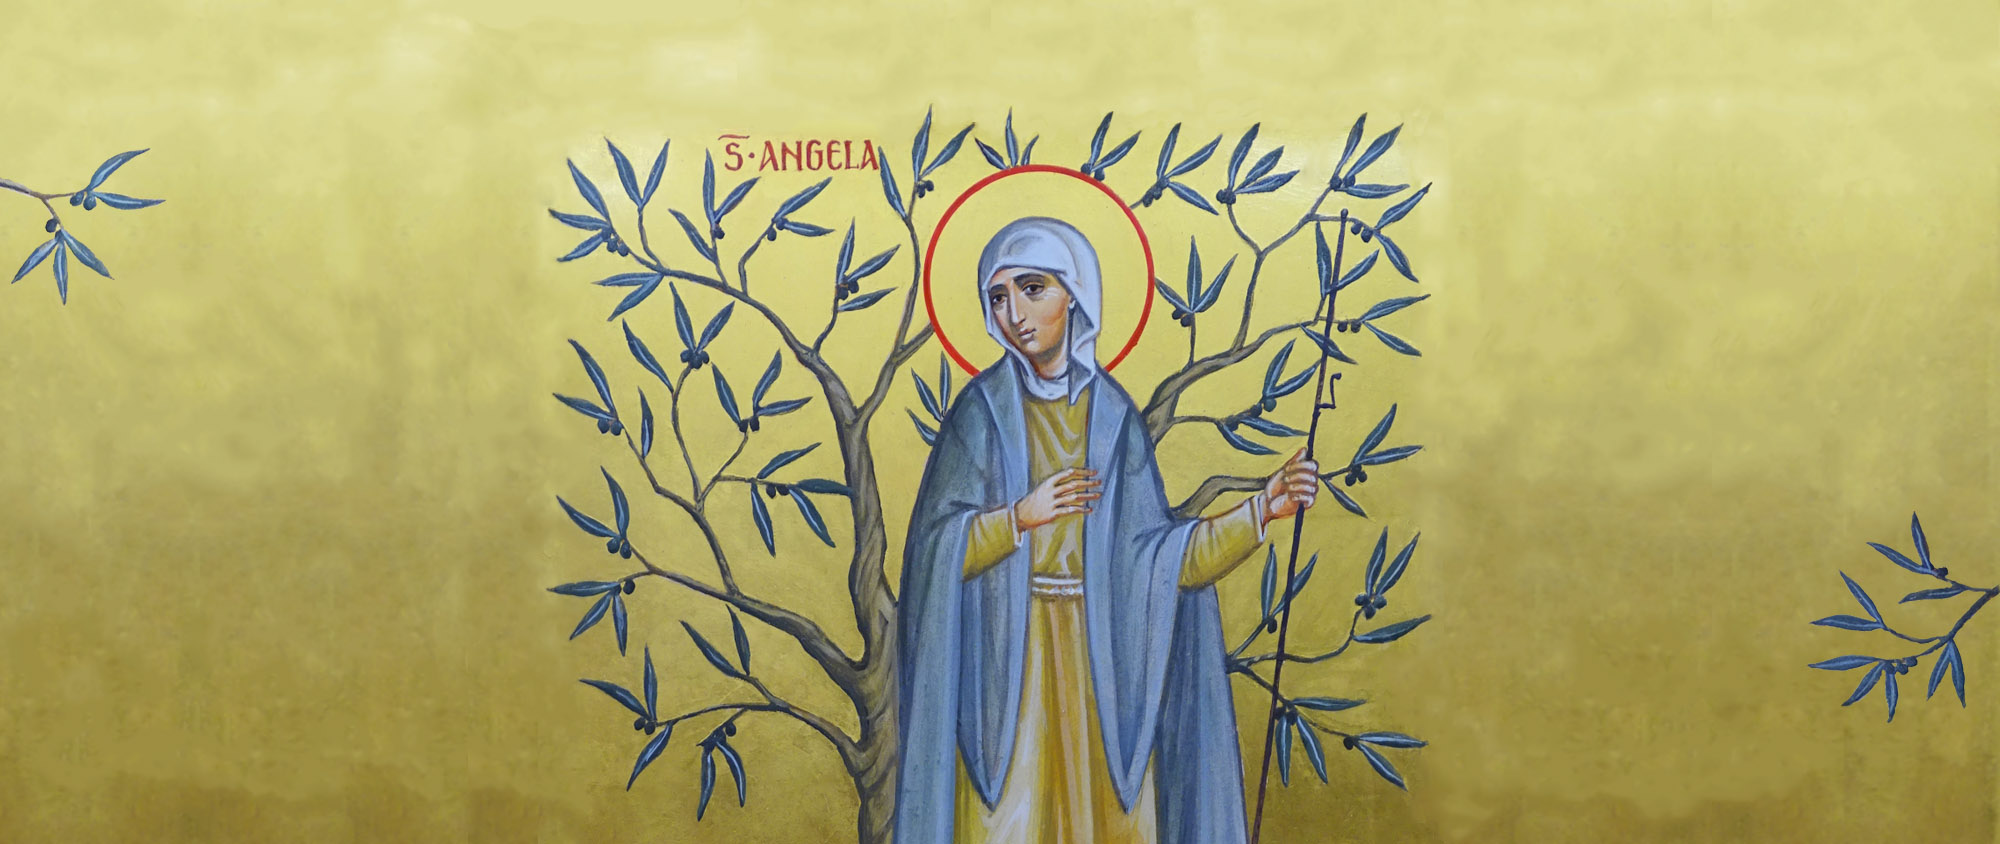 Saint Angela, fruitful olive in the house of God, pray for us...